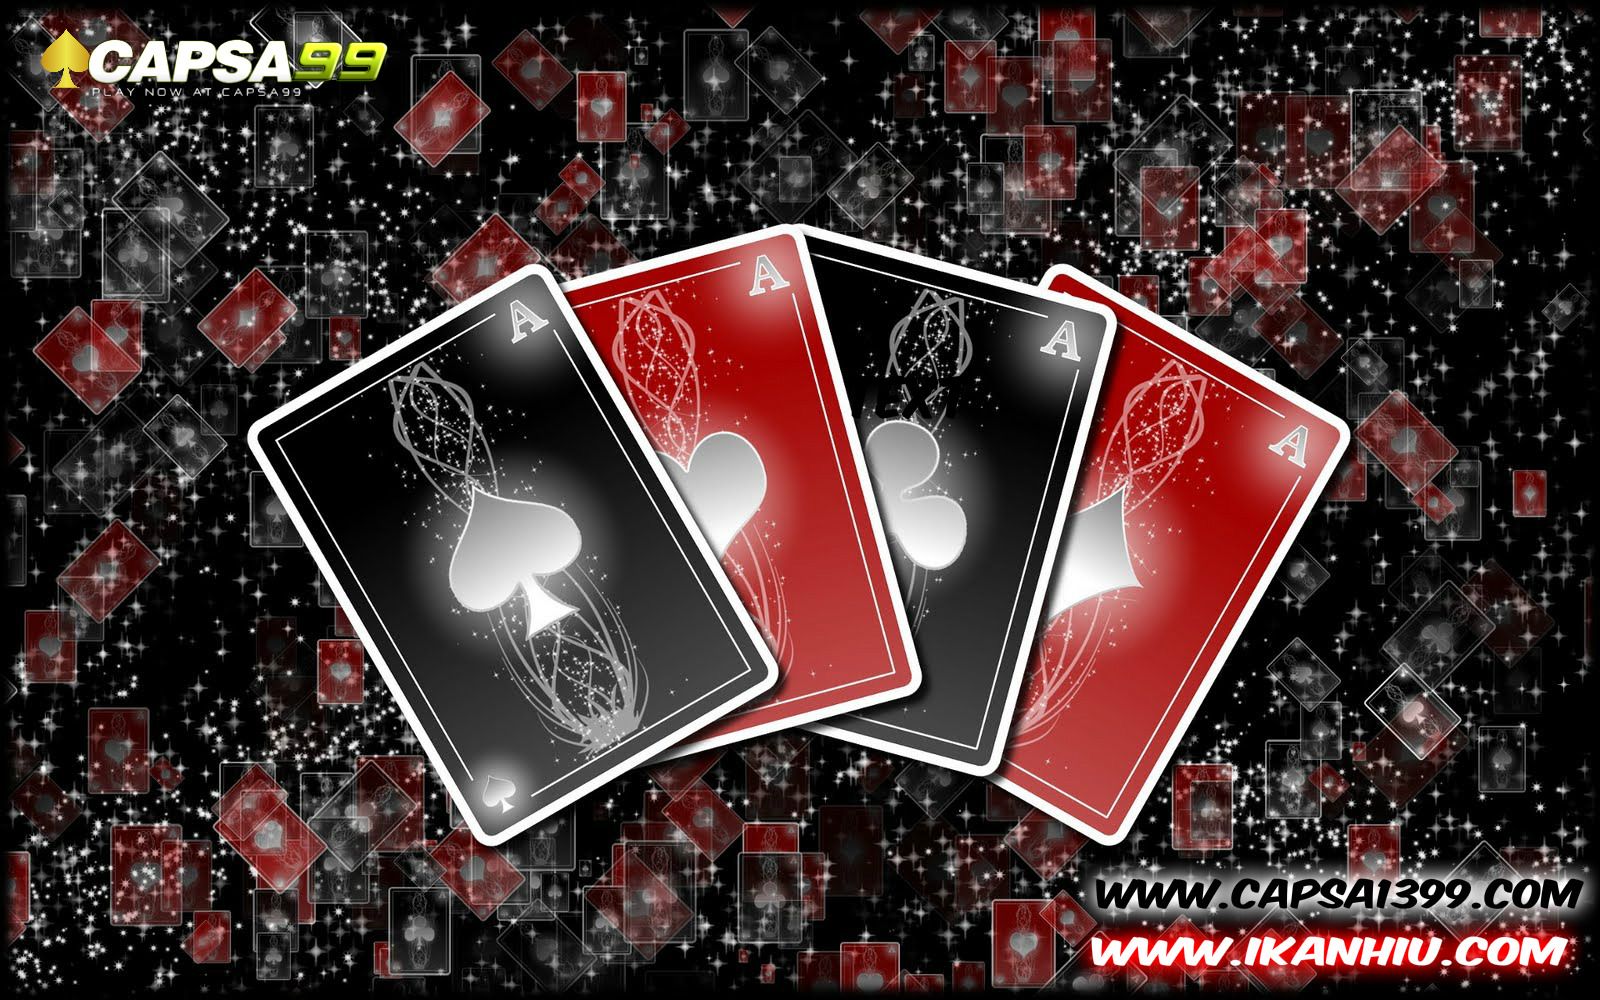 Real Casino Experience at Your Fingertips: Play and Win Big